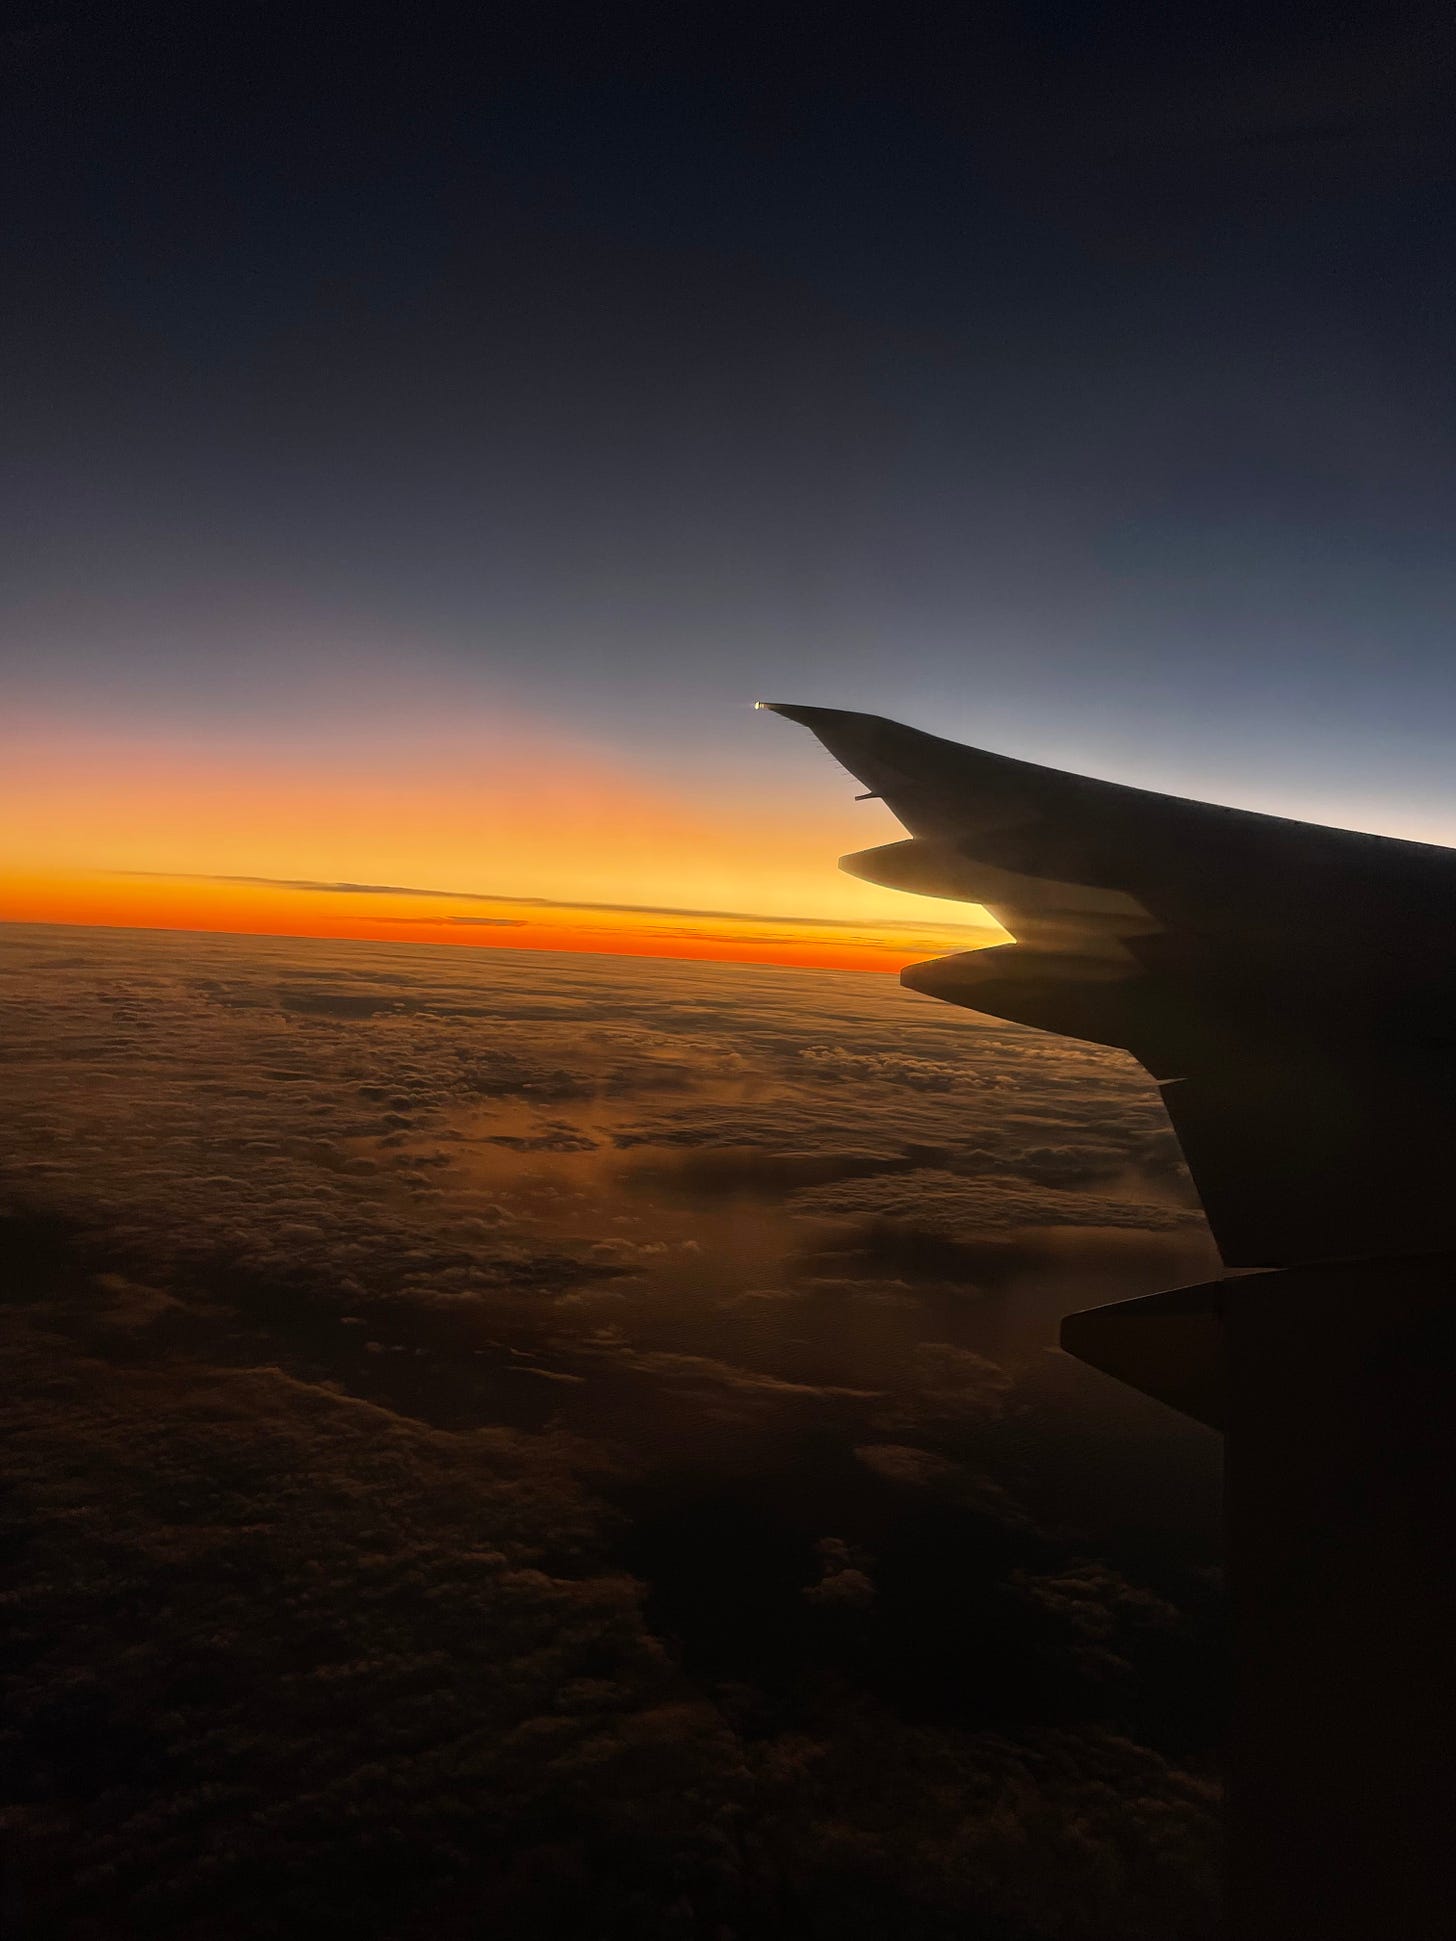 View of sunrise from a plane window. Sharp oranges and soft yellows blend into the deep blue sky. Clouds drift over the Pacific Ocean below. The silhouette of a plane wing.